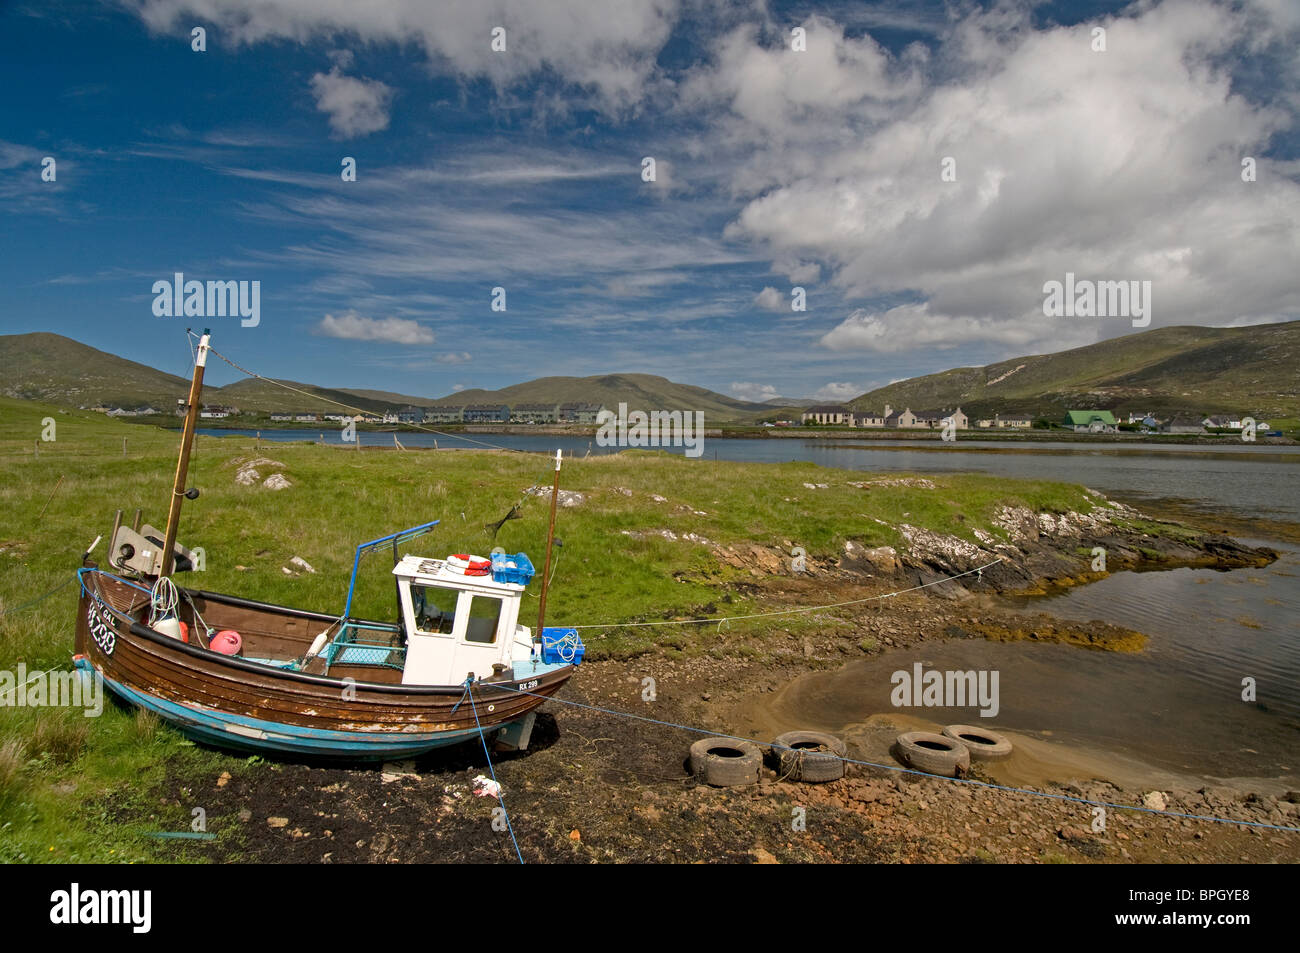 Fishin boat at Low tide at Leverburgh, South Harris, Western Isles, Outer Hebrides. Scotland.  SCO 6485 Stock Photo